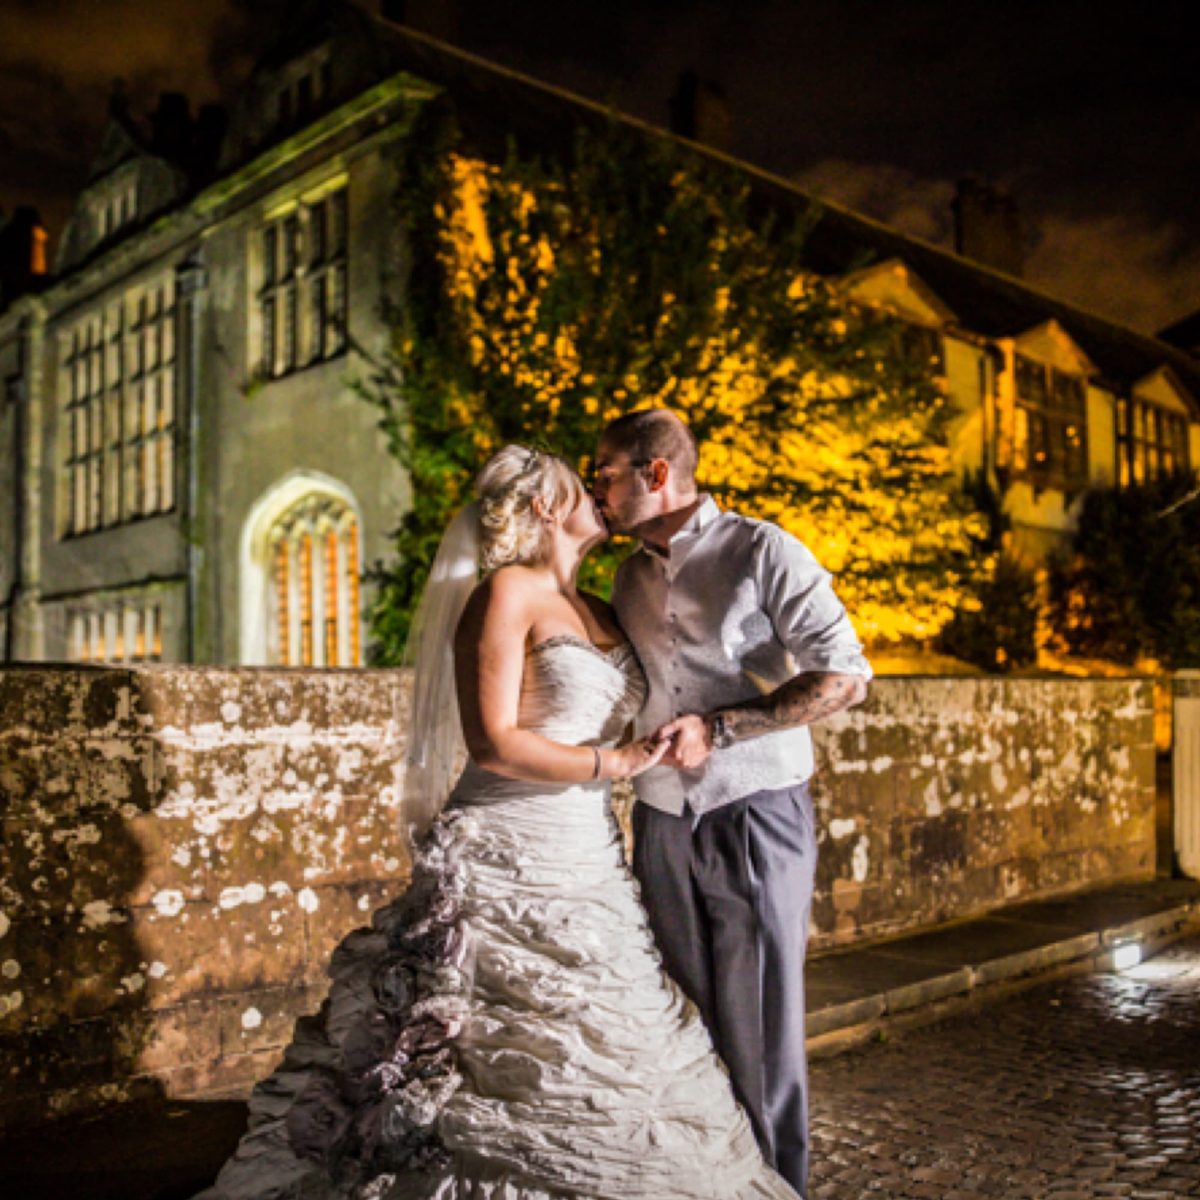 Wedding experience at Coombe Abbey